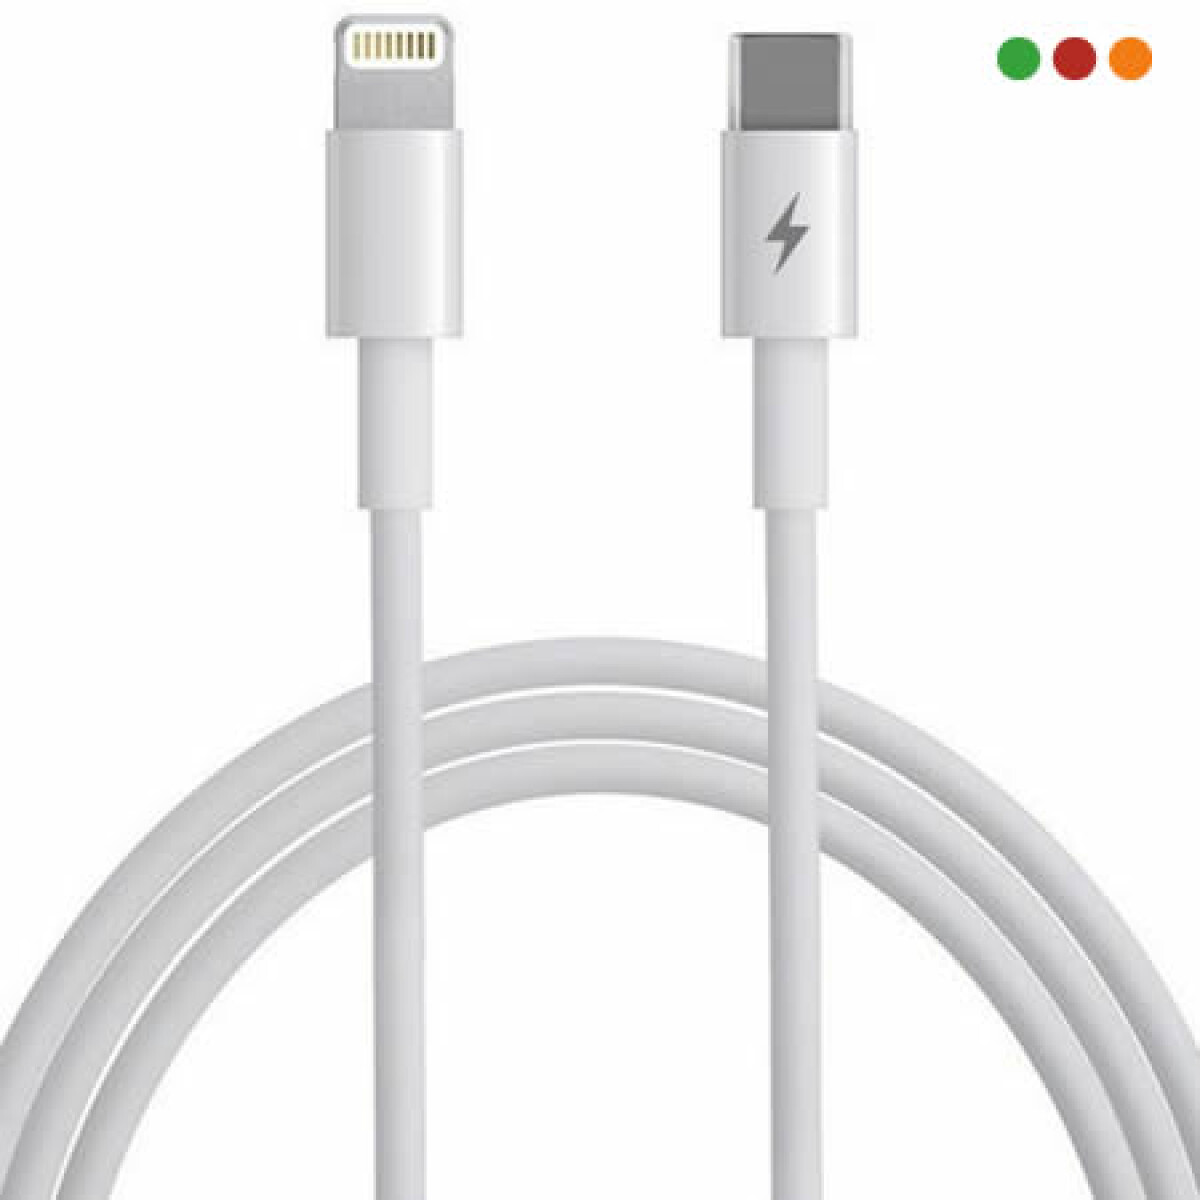 iPhone - Cable USB C a Lightning 1 Mts | Generico - Iphone - Cable Usb C A Lightning 1 Mts | Generico 